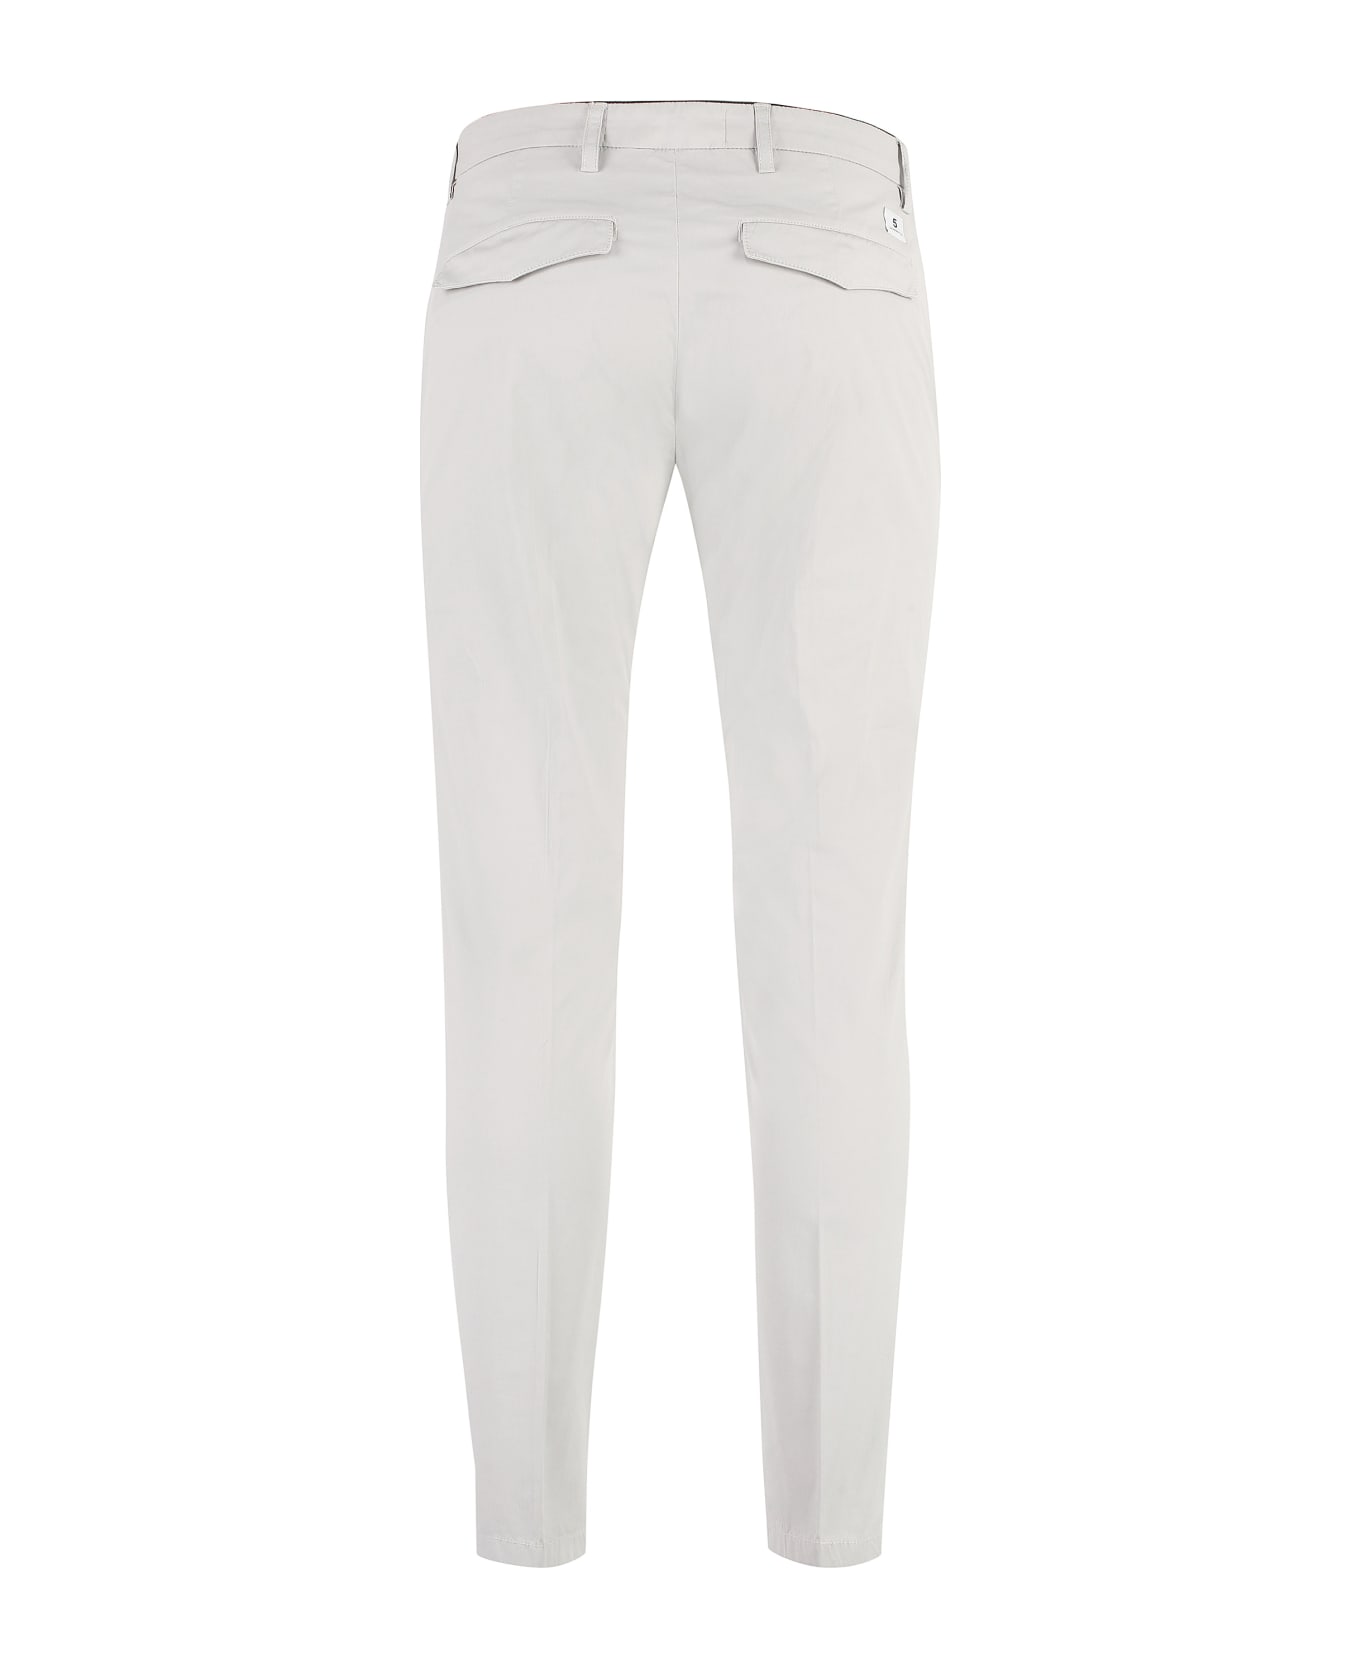 Department Five Prince Chino Trousers - grey